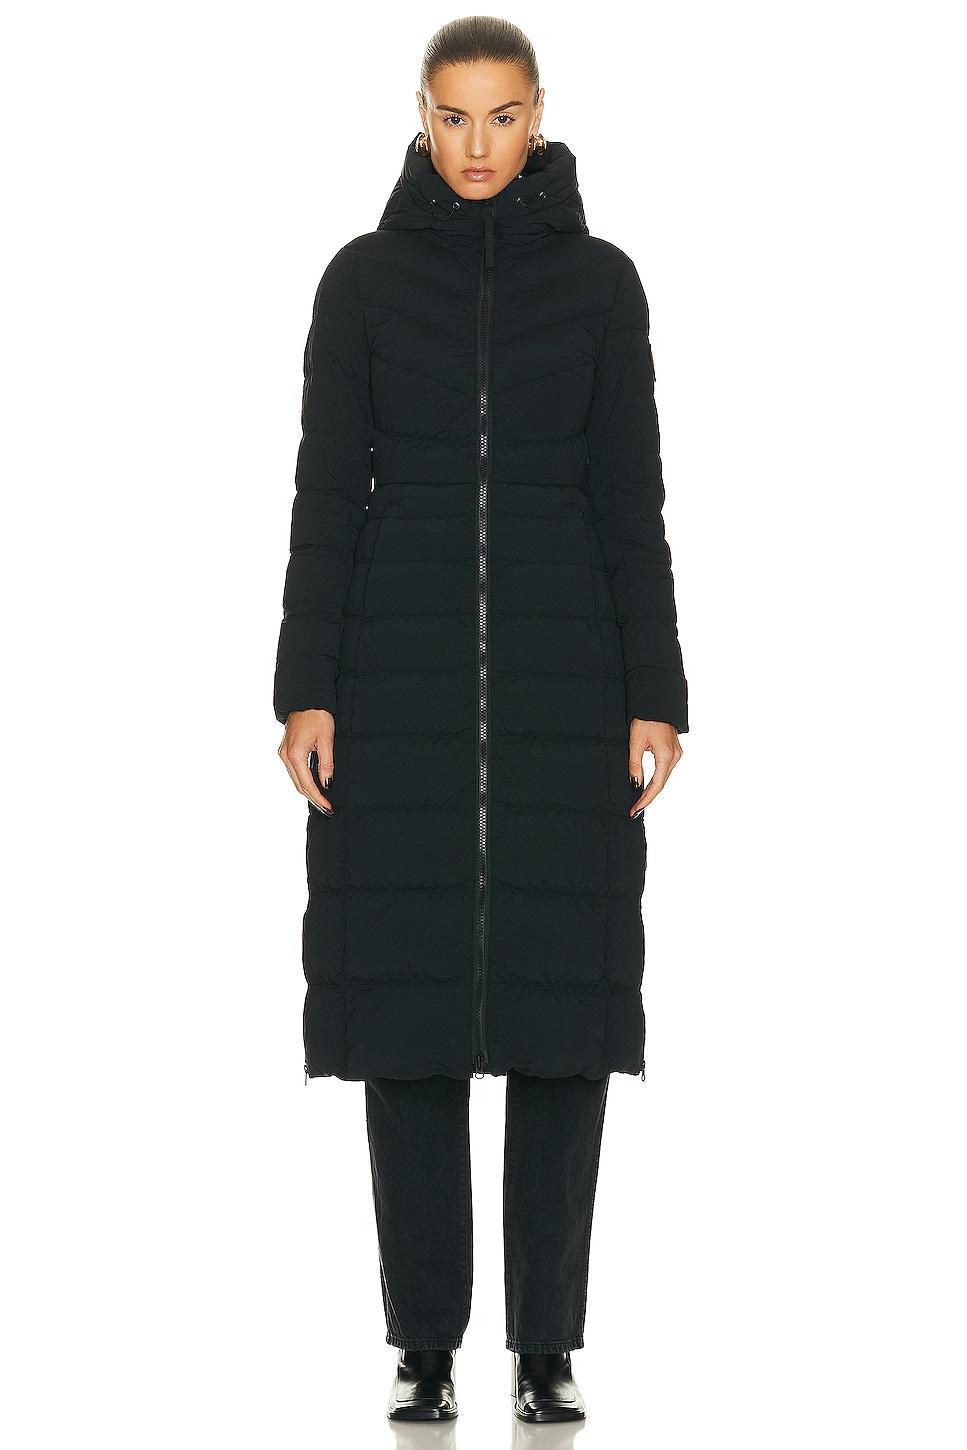 Canada Goose Clair Long 750 Fill Power Down Puffer Coat Product Image